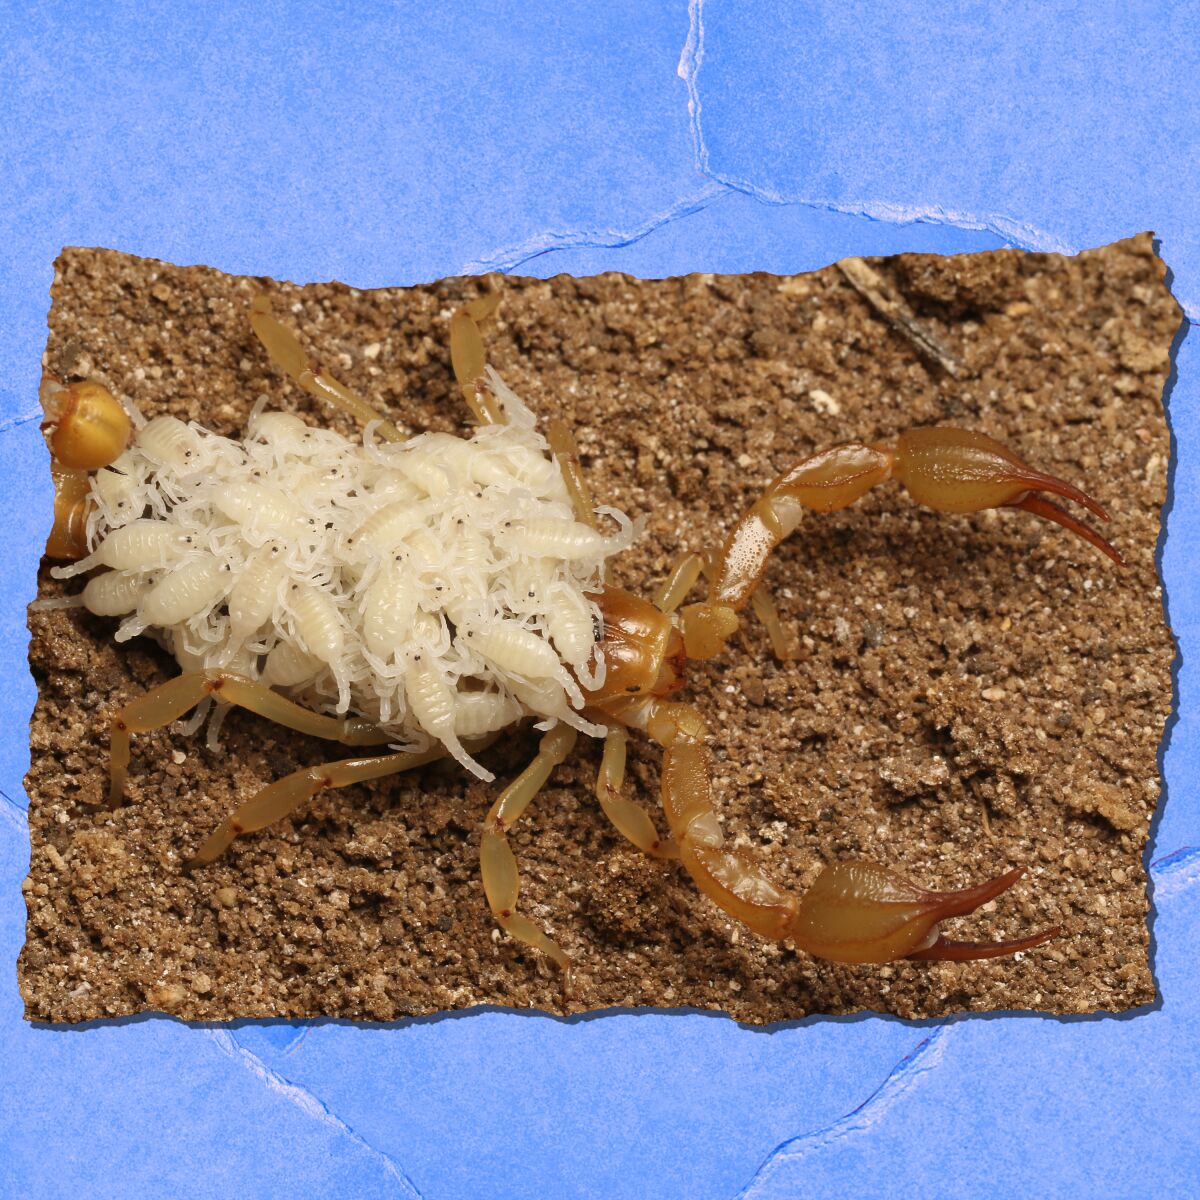 A scorpion with a bunch of tiny white scorpions on its back.